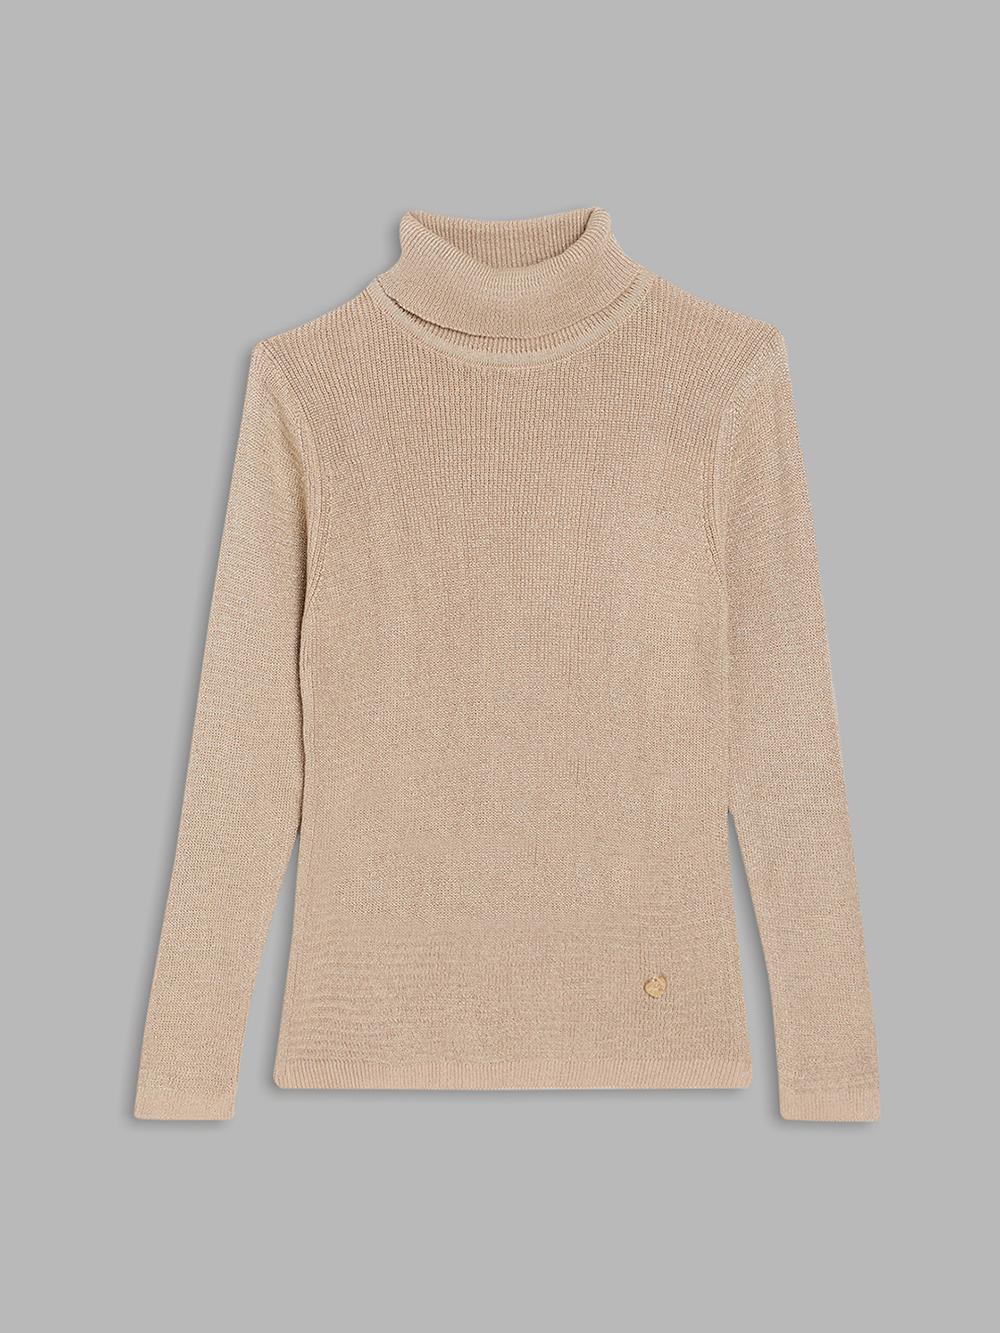 natural-solid-high-neck-sweater